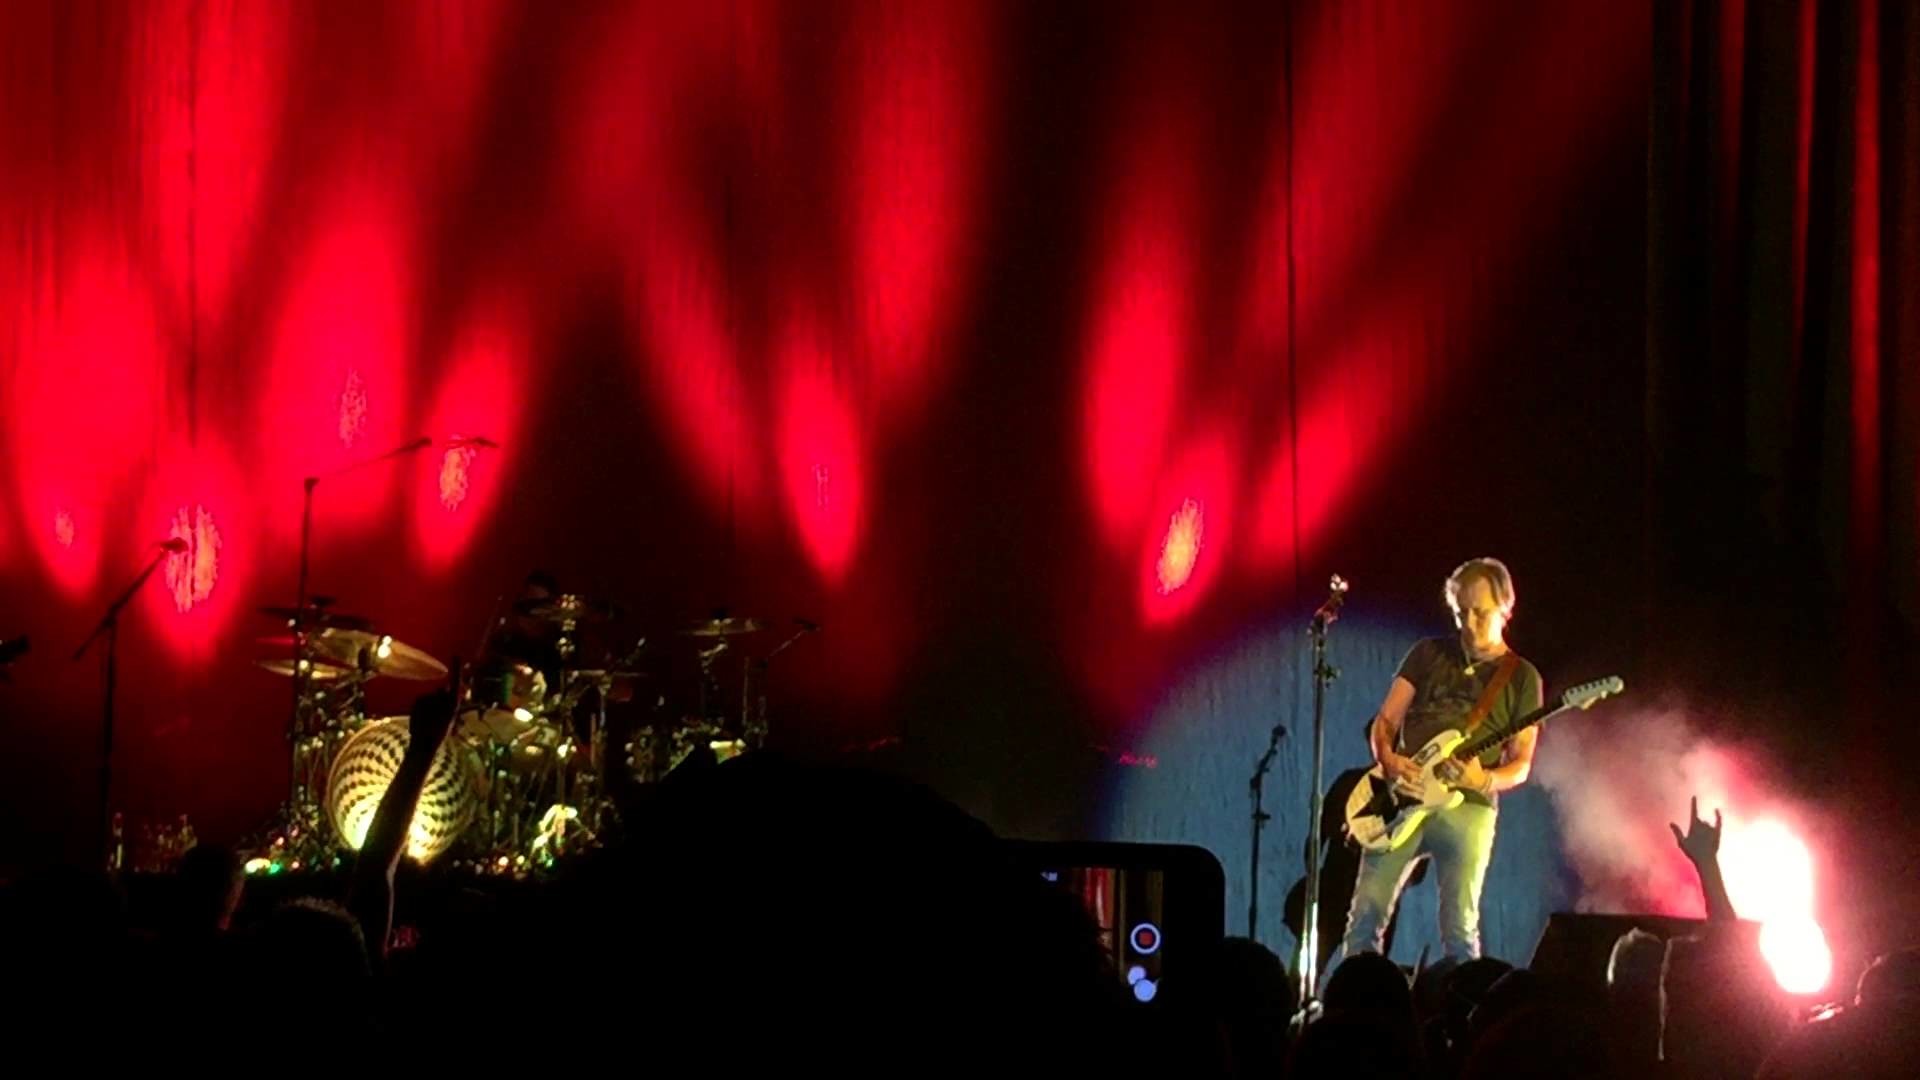 1920x1080 Alice in Chains- Rooster w/ the Real Rooster Jerry Cantrell Sr.- Winstar  Casino 1 Aug 15